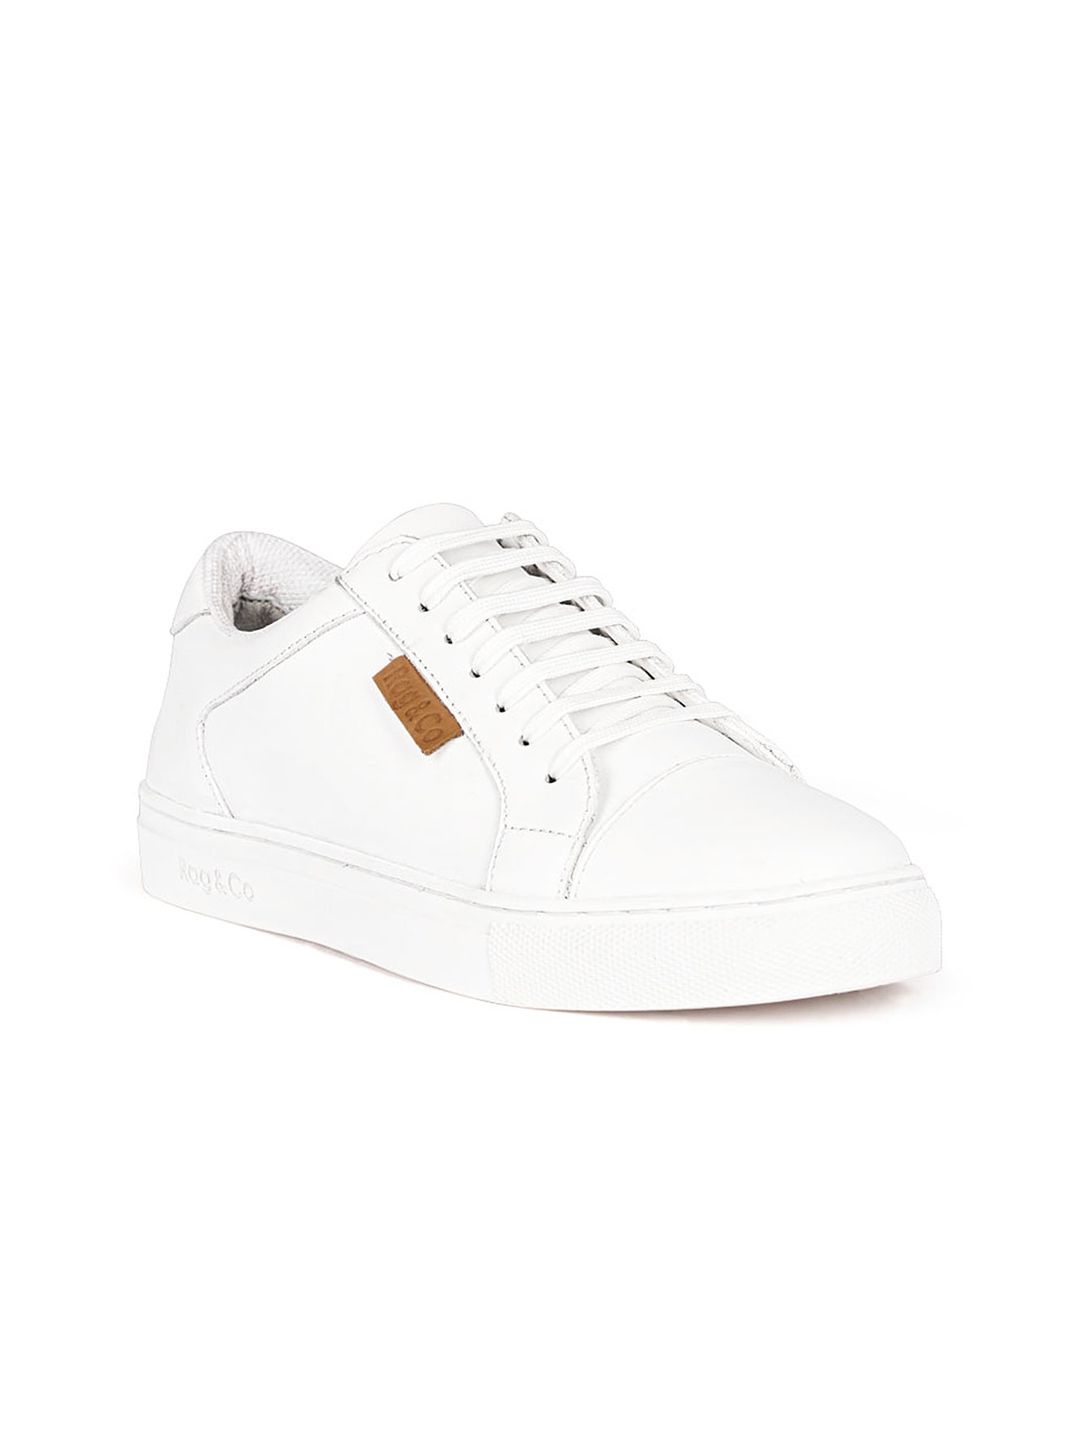 RAG & CO Women ASHFORD Comfort Insole Leather Basics Sneakers Price in India